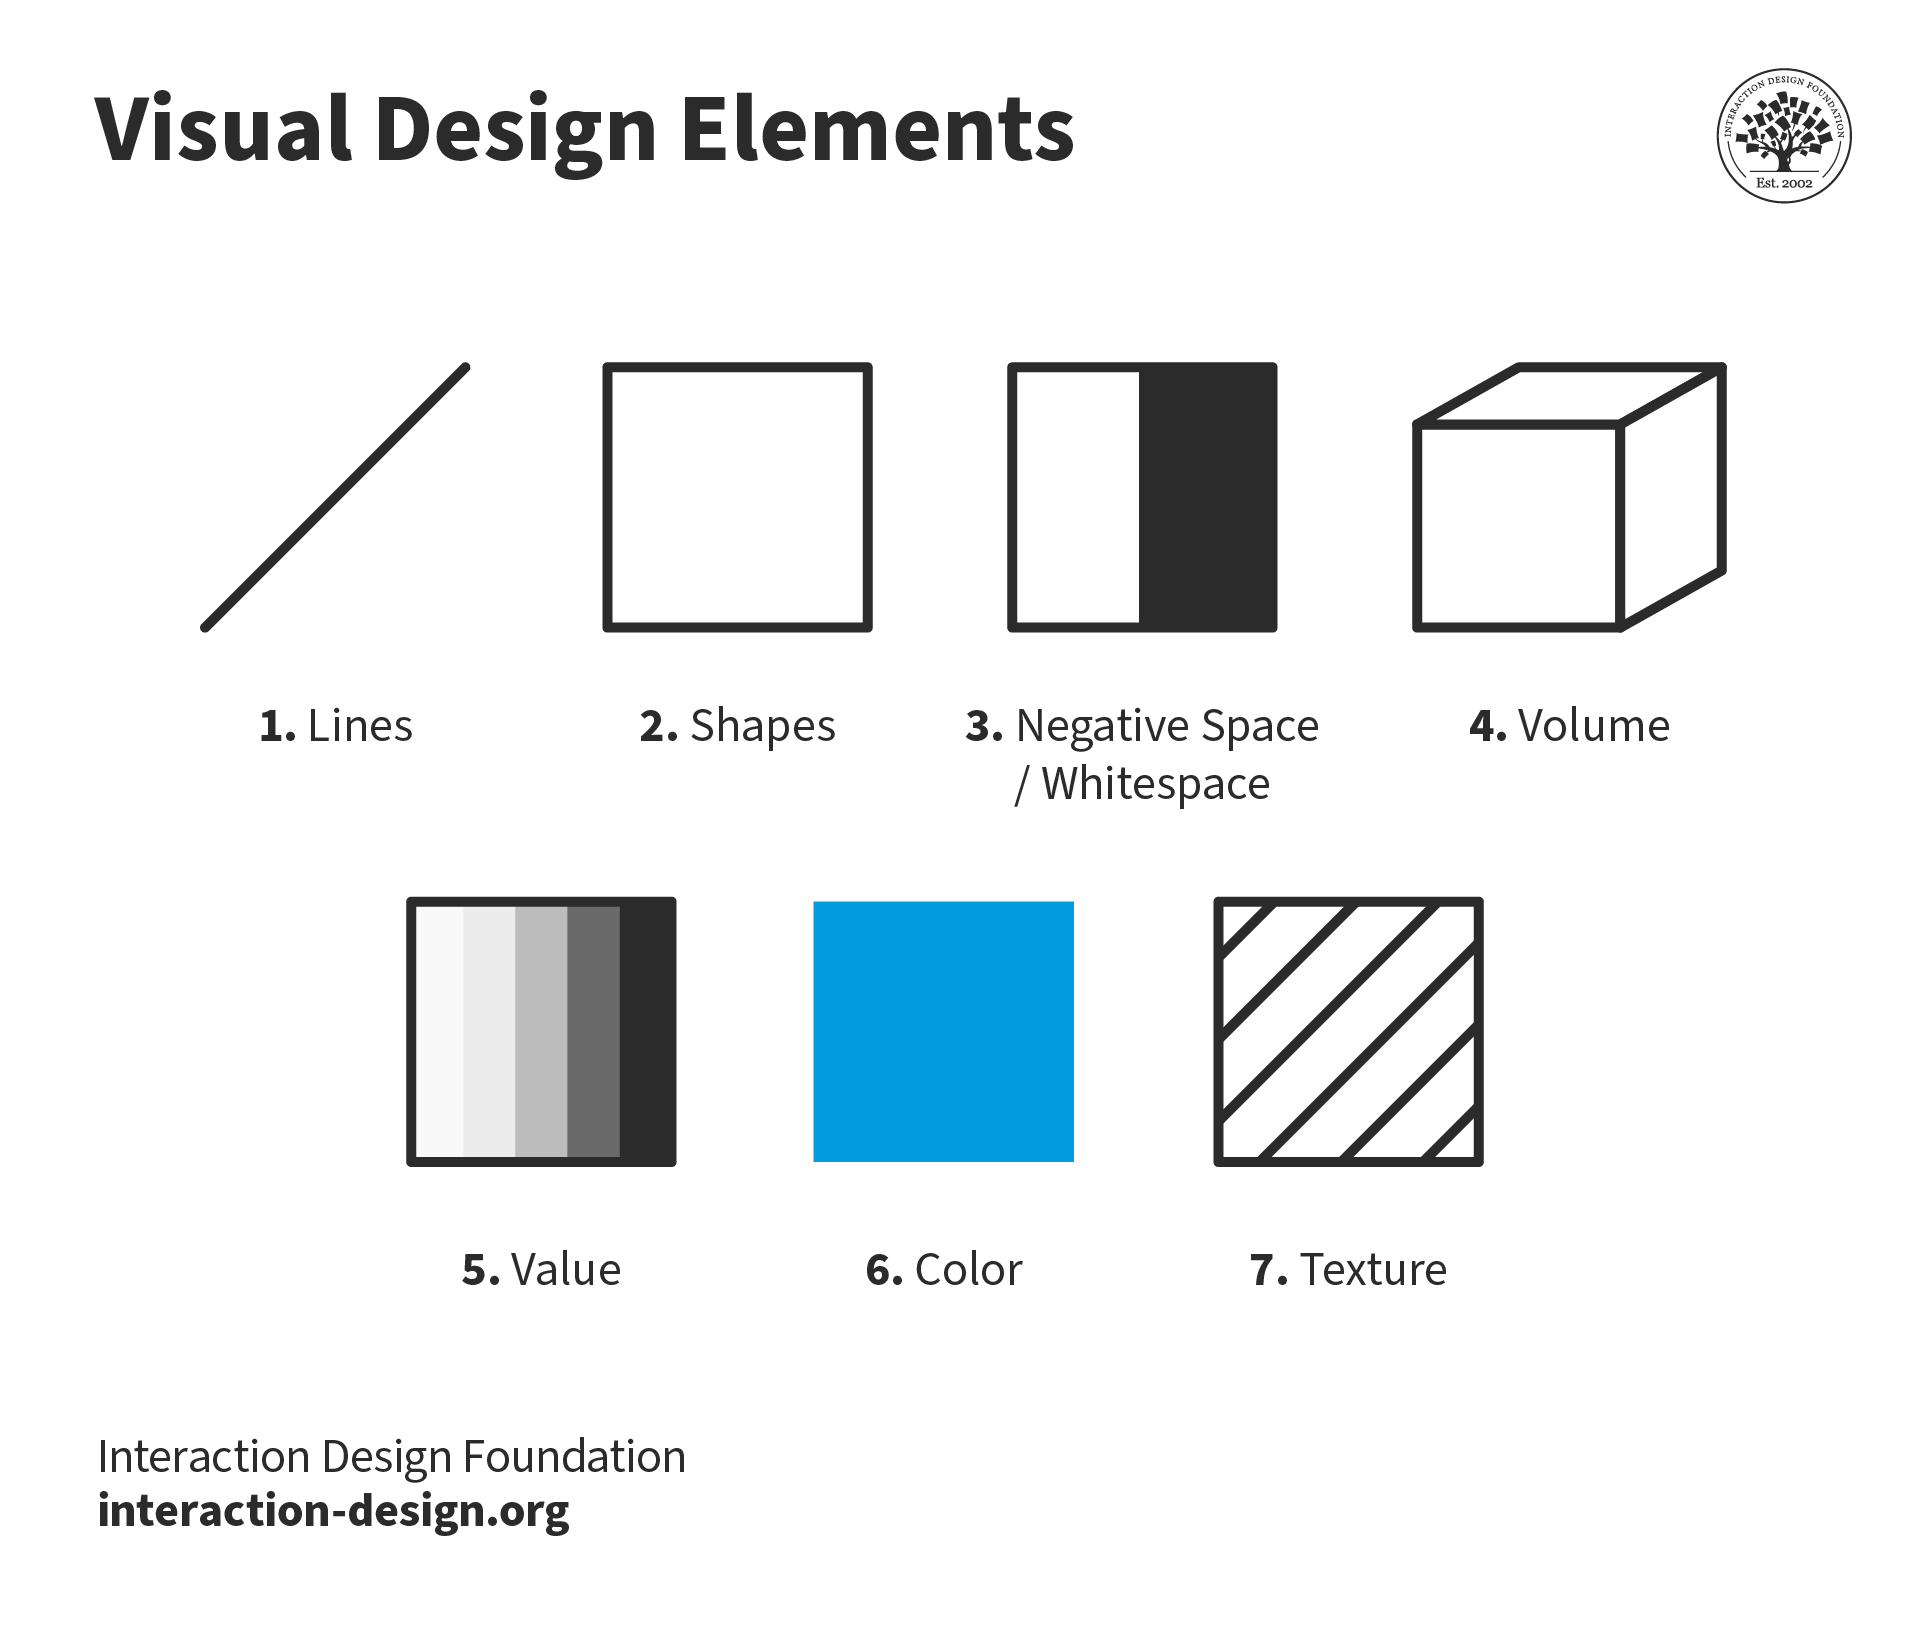 graphic design elements and principles